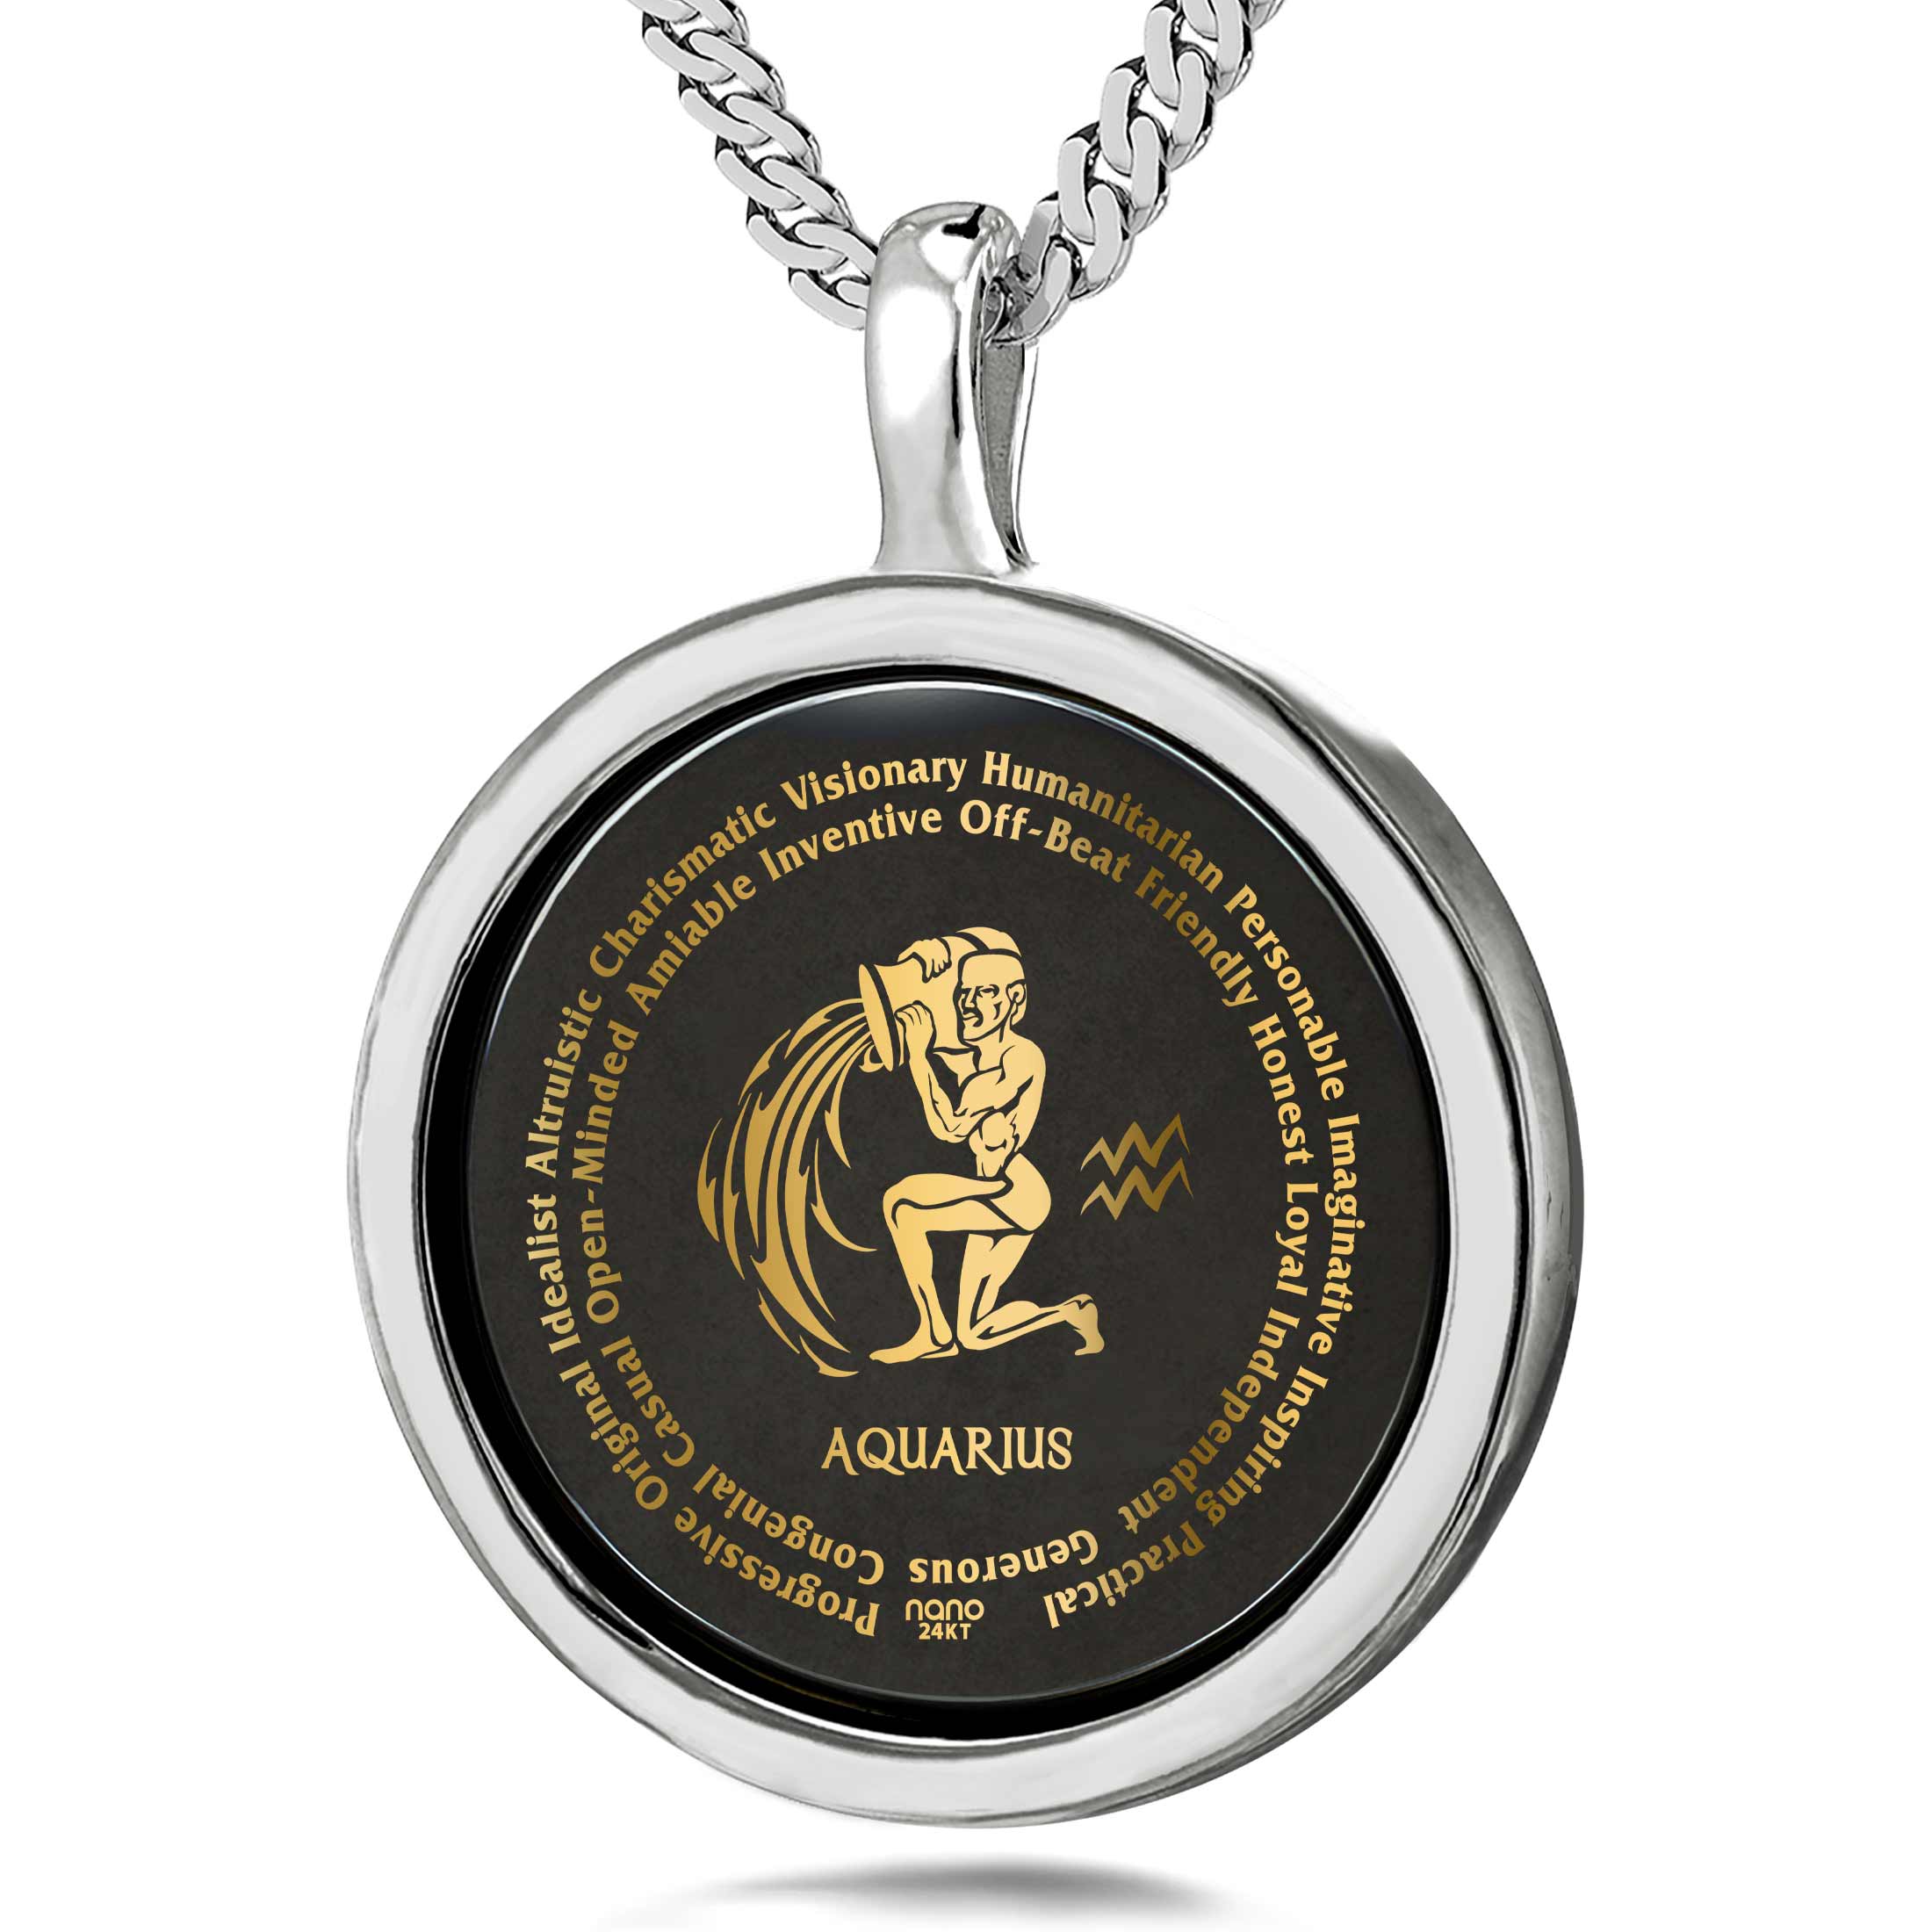 Circular Aquarius necklace featuring the Aquarius Necklaces for Lovers of the Zodiac with descriptive text and an emblem, hanging from a silver chain, accompanied by a tag.